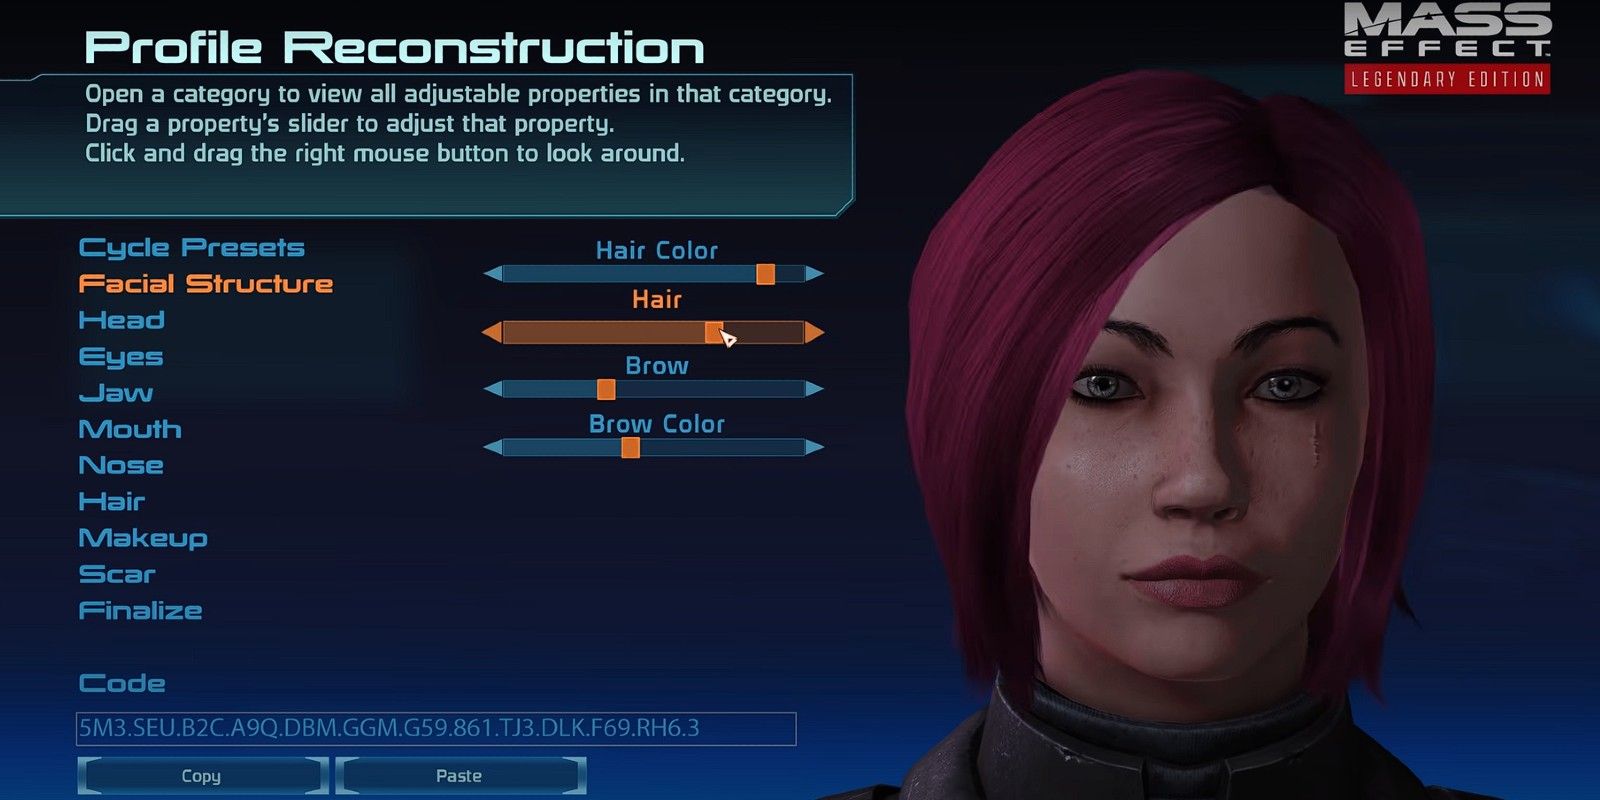 The Character Creation features are expanded in Mass Effect: Legendary Edition